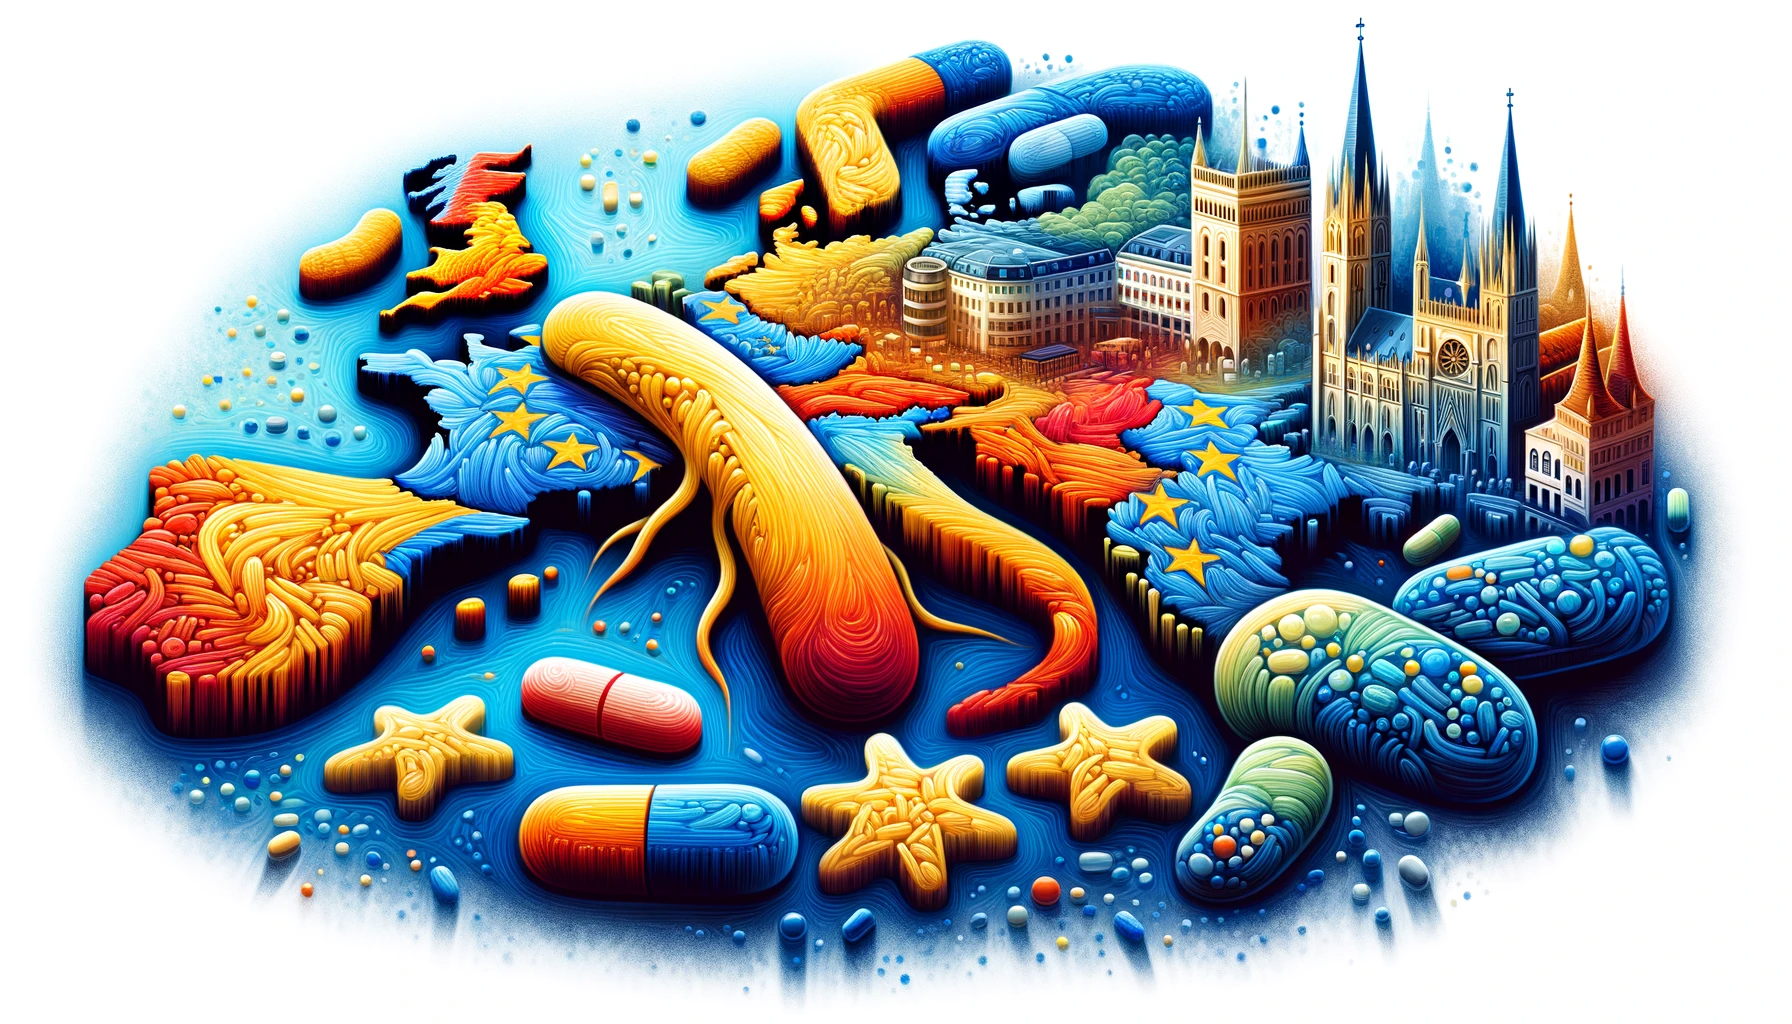 Rapid Communcation: Rebound in community antibiotic consumption after the observed decrease during the COVID-19 pandemic, EU/EEA, 2022